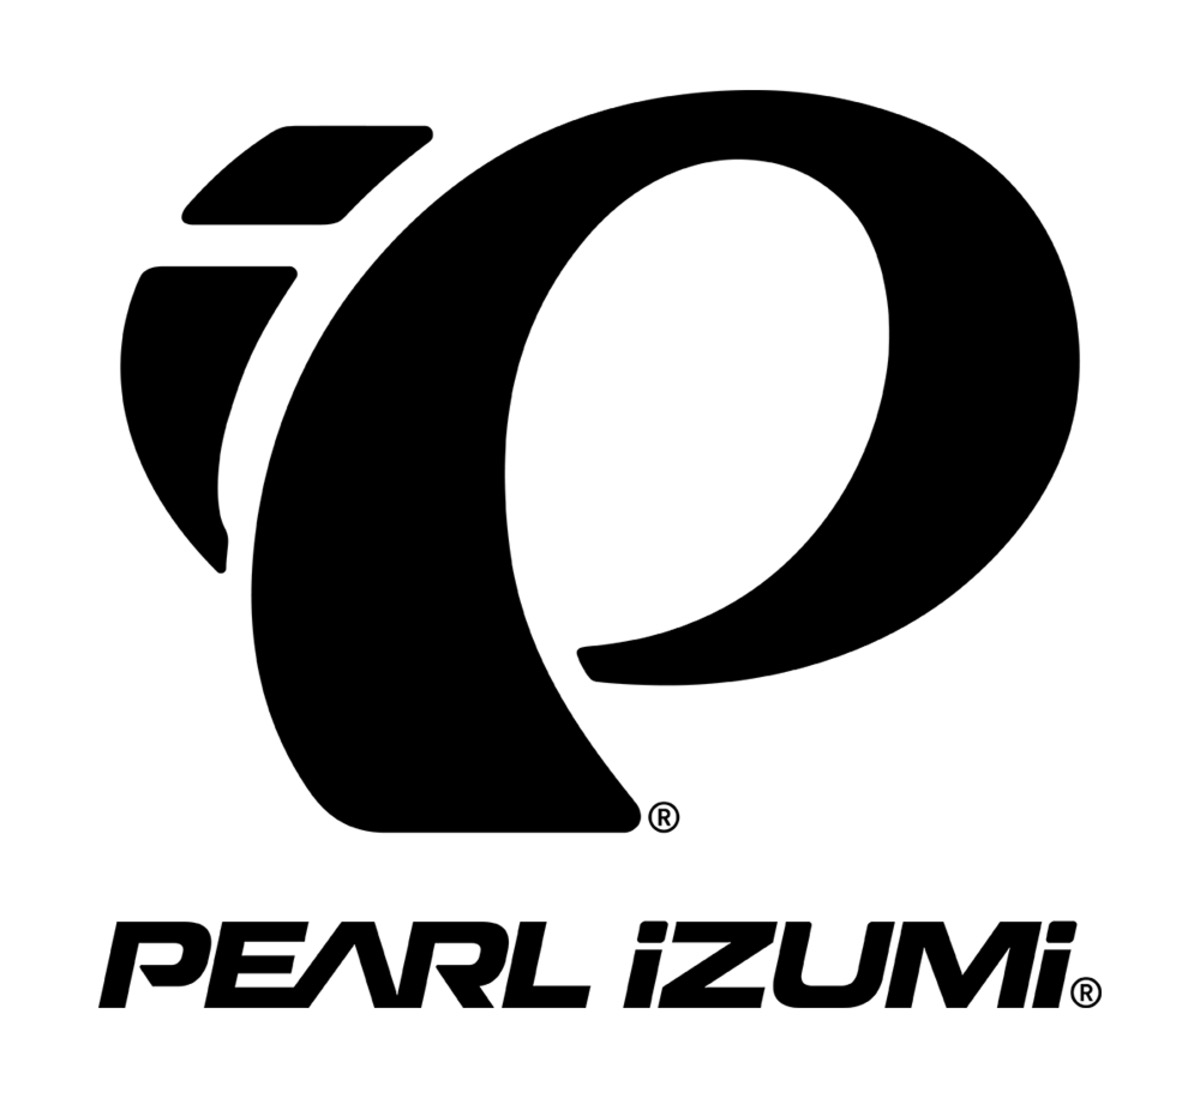 Specialized buys former Pearl Izumi building